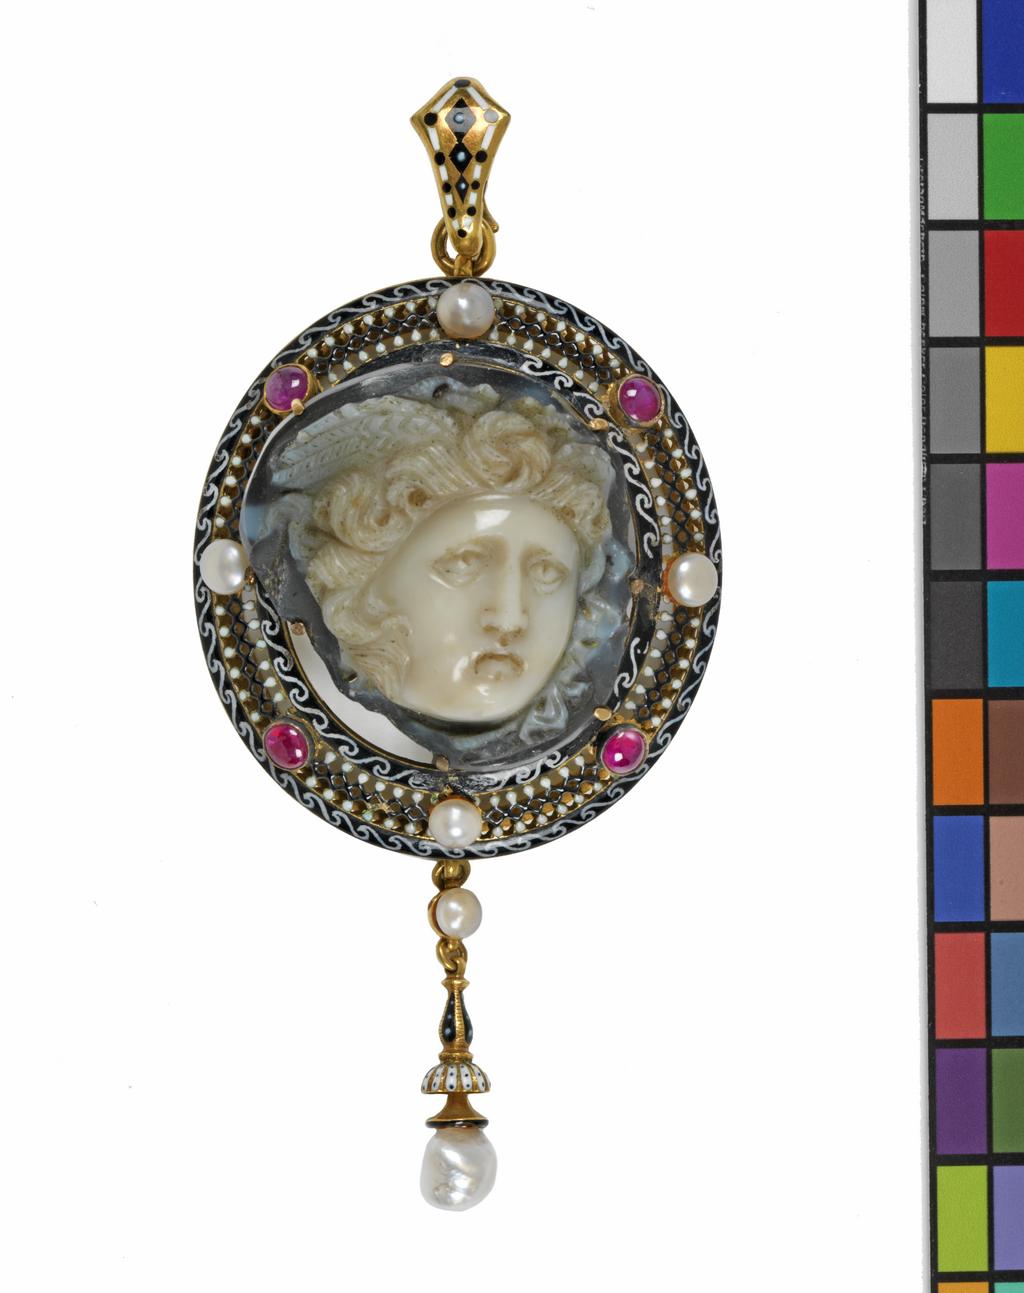 An image of Jewellery. Pendant. Unknown frame maker, London. Giuliano, Carlo, cameo maker (Italian jeweller in GBR, 1831-1895). Onyx cameo with white upper layer and dark lower layer, carved with a head of Medusa of Rondanini type. Shown frontally, the back left rough. Set by means of seven claws in an oval gold openwork frame enamelled black and white and set with four pearls and four cobochon pink gemstones. Suspended from the lower edge are a pearl, and an enamelled gold 'tassel' with a larger pearl at the end. At the top there is a ring and an enamelled gold loop for suspension. Height, whole, 8.2 cm, width, whole, 3.8 cm, height, cameo, 2.5 cm, width, cameo, 2.6 cm, depth, cameo, 0.9, cm, circa AD 100-200, cameo, mount late 19th century. Revivalism. Production Note: This pendant unites a second century Roman Imperial cameo of Medusa with a Renaissance Revival style mount, by Carlo Giuliano one of the leading jewellers who worked in both the Renaissance and Archeological Revival styles.